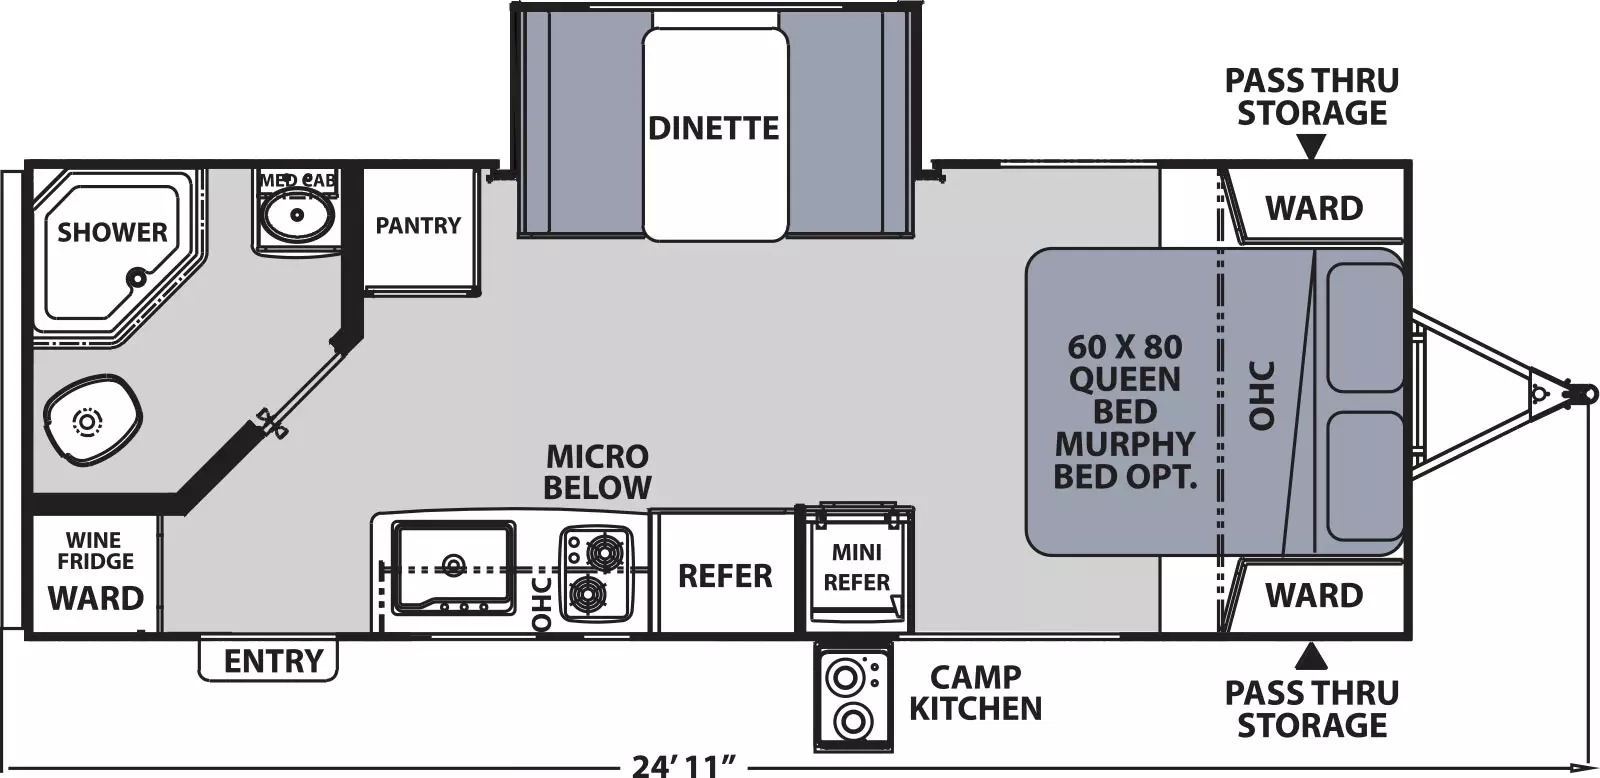 The 201RBS has one slideout and one entry. Exterior features a front pass thru storage, camp kitchen, and 24 foot 11 inch length. Interior layout from front to back: queen bed with overhead cabinet and wardrobes on each side (murphy bed optional); off-door side dinette slideout and pantry; door side mini refrigerator, refrigerator, cooktop with microwave below, overhead cabinet and sink;  rear door side entry, wine refrigerator, and wardrobe; rear off-door side full bathroom with medicine cabinet.